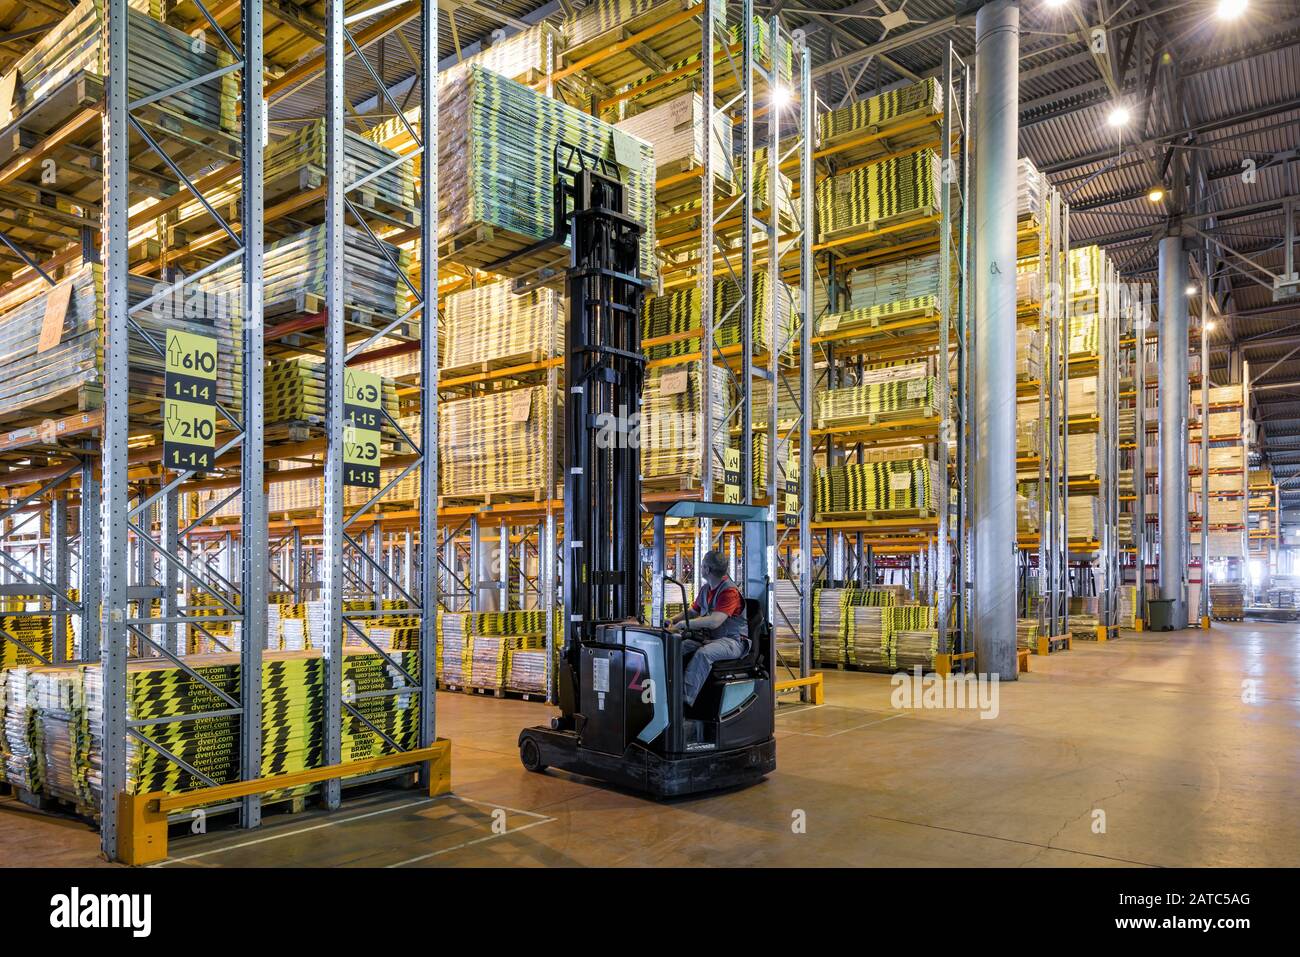 Moscow - August 1, 2017: The worker loads goods in a large warehouse. Moscow is a modern city with well-developed logistics infrastructure. Stock Photo